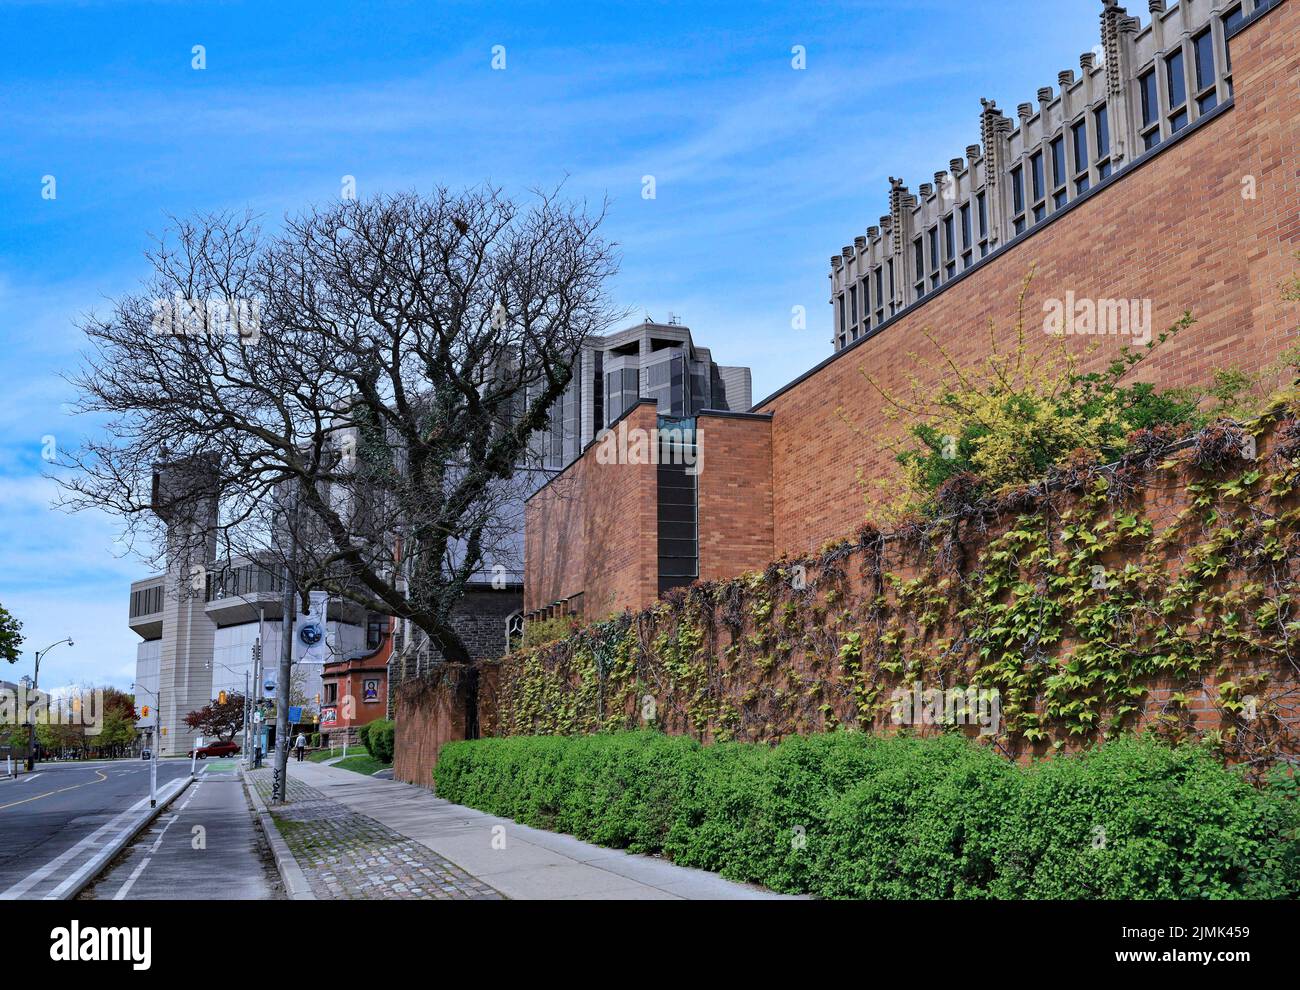 University of Toronto campus, Massey College on the right and Robarts Library in the background Stock Photo